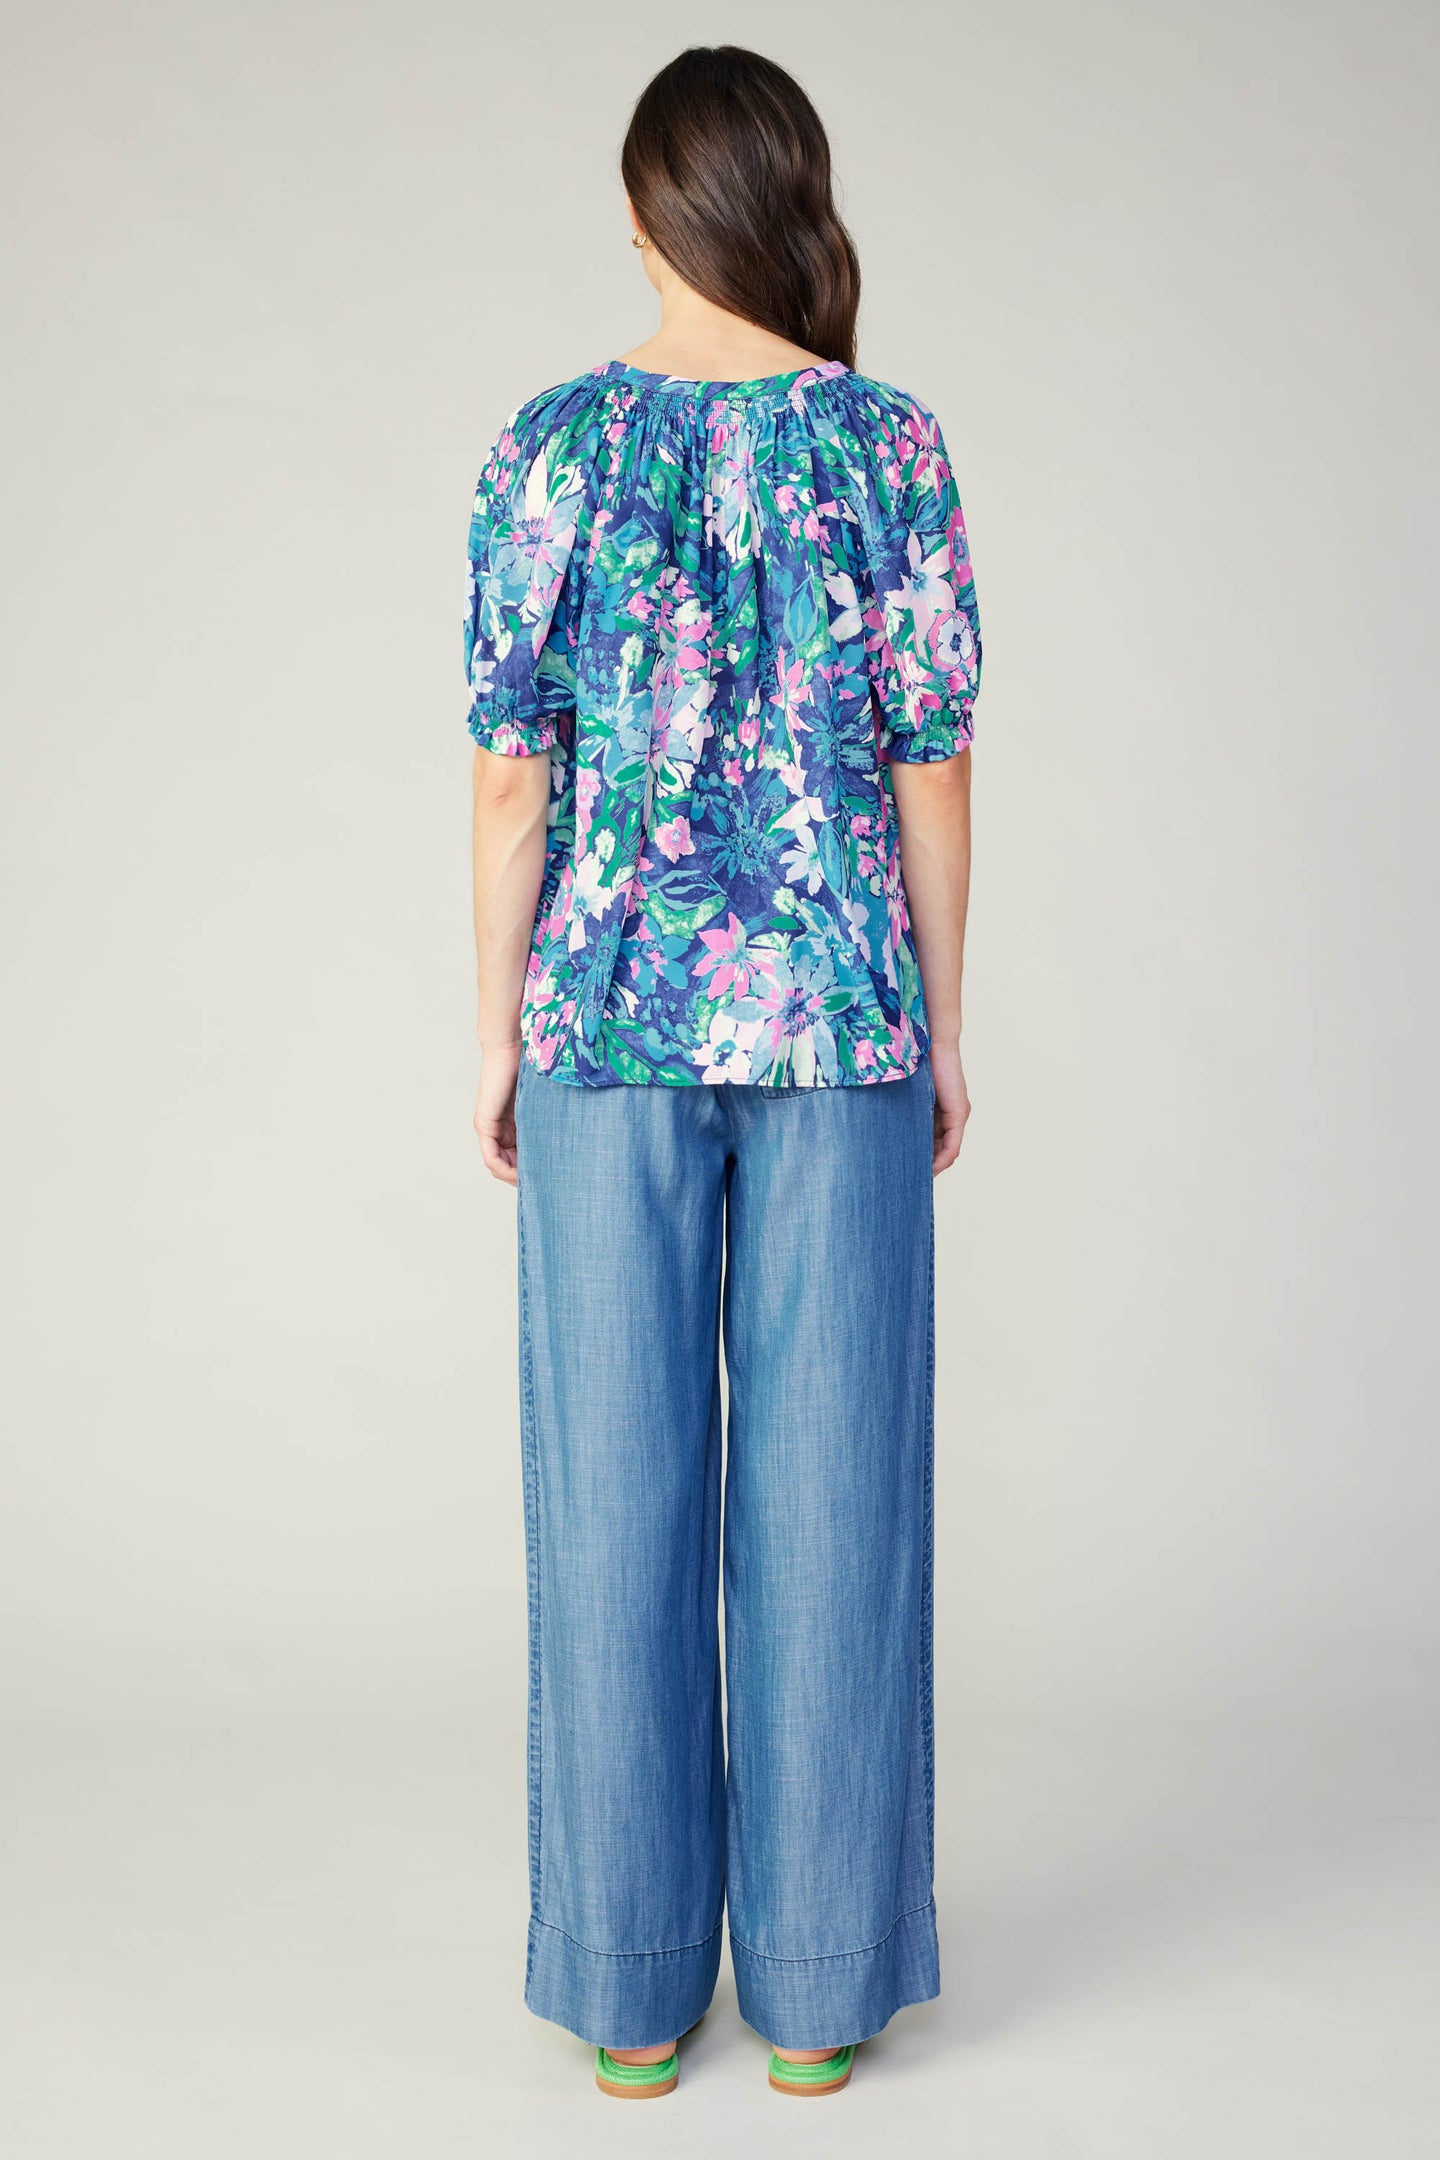 Painterly Floral Top